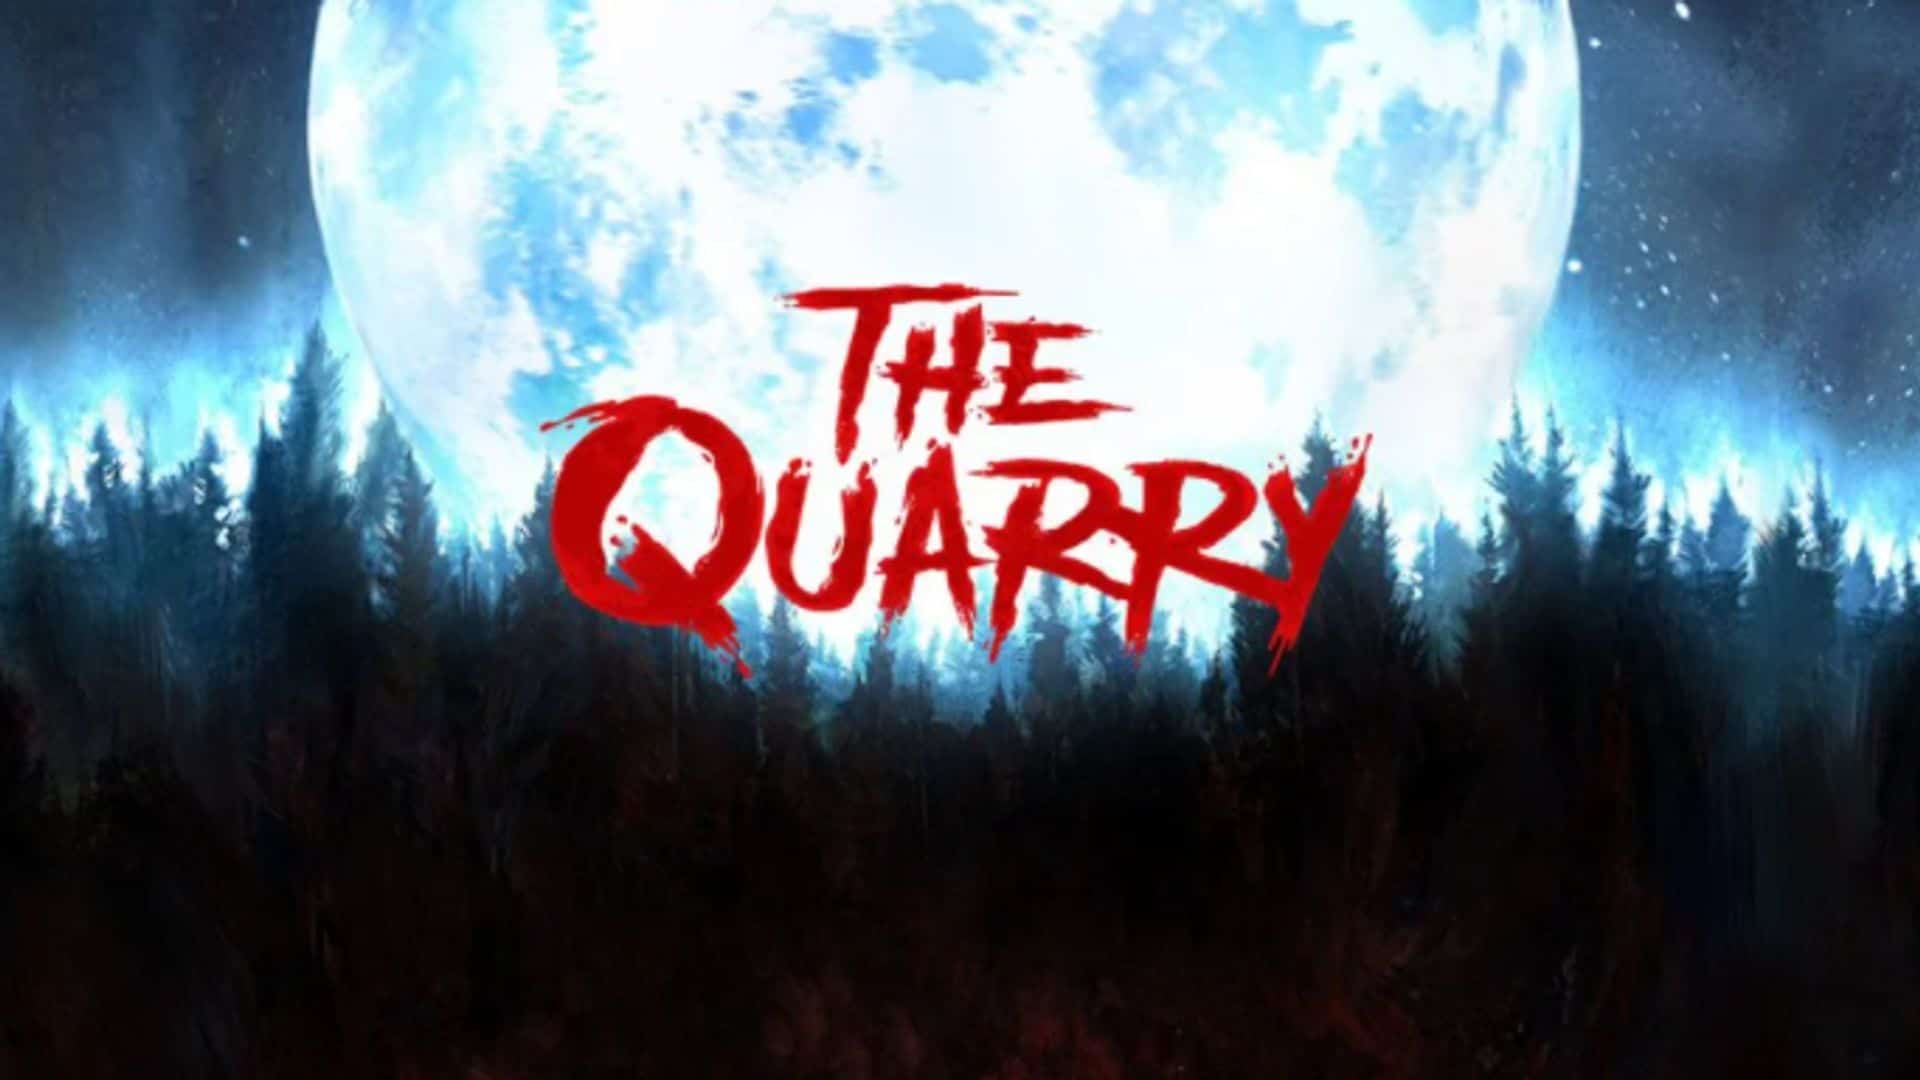 The Quarry, a new Teen-Horror Narrative game from Supermassive, launches on June 10